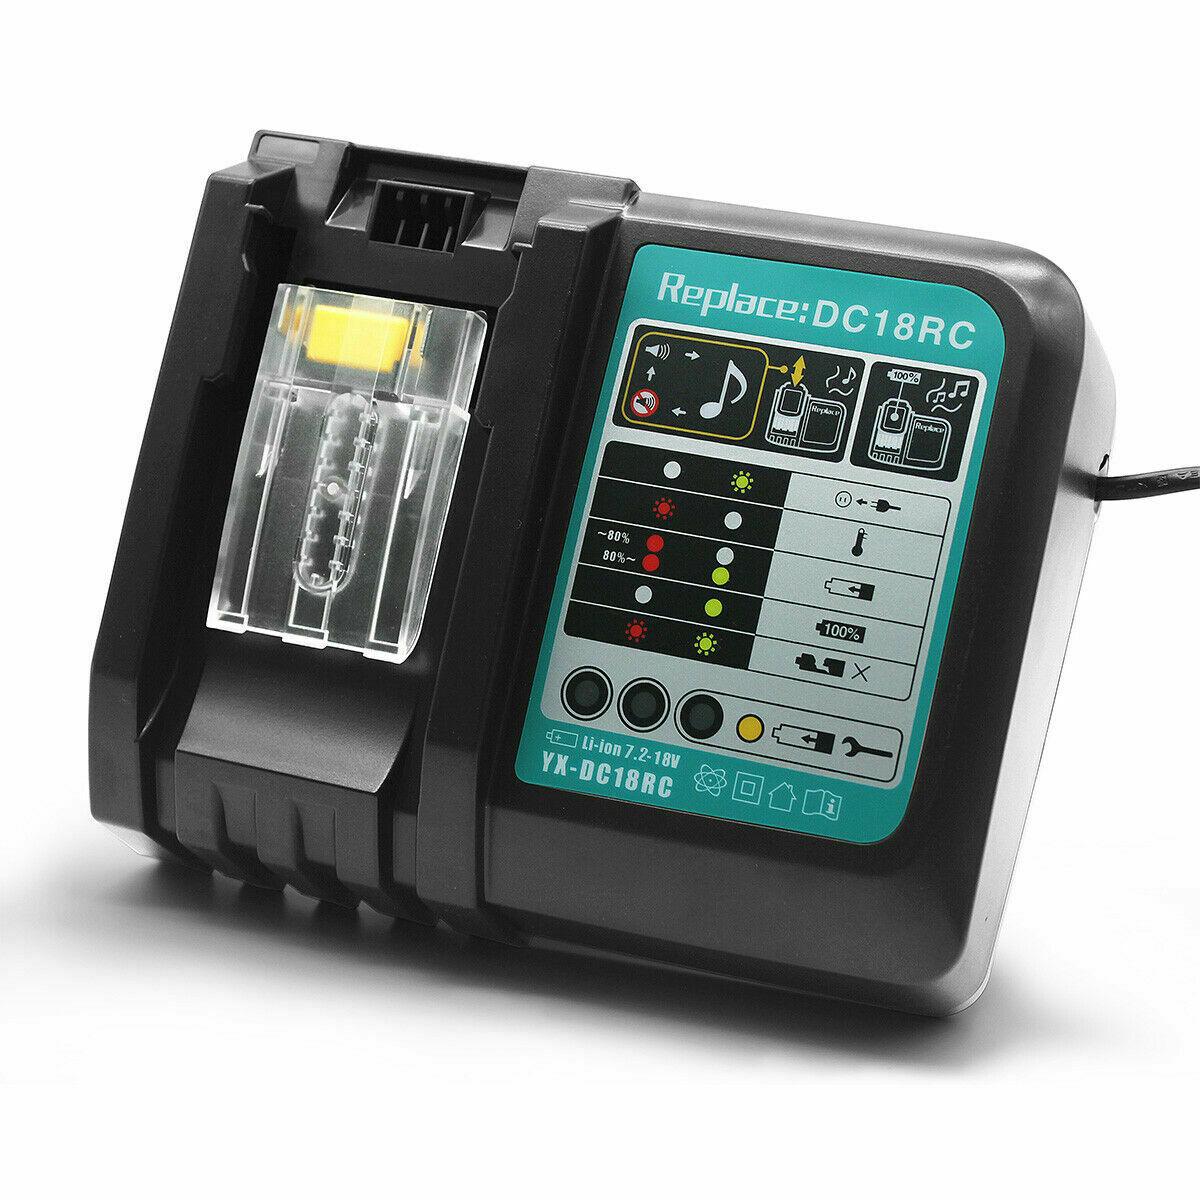 For Makita BL1830 BL1840 BL1850 DC18RC Rapid Fast Lithium-Ion Battery Charger AU - Office Catch